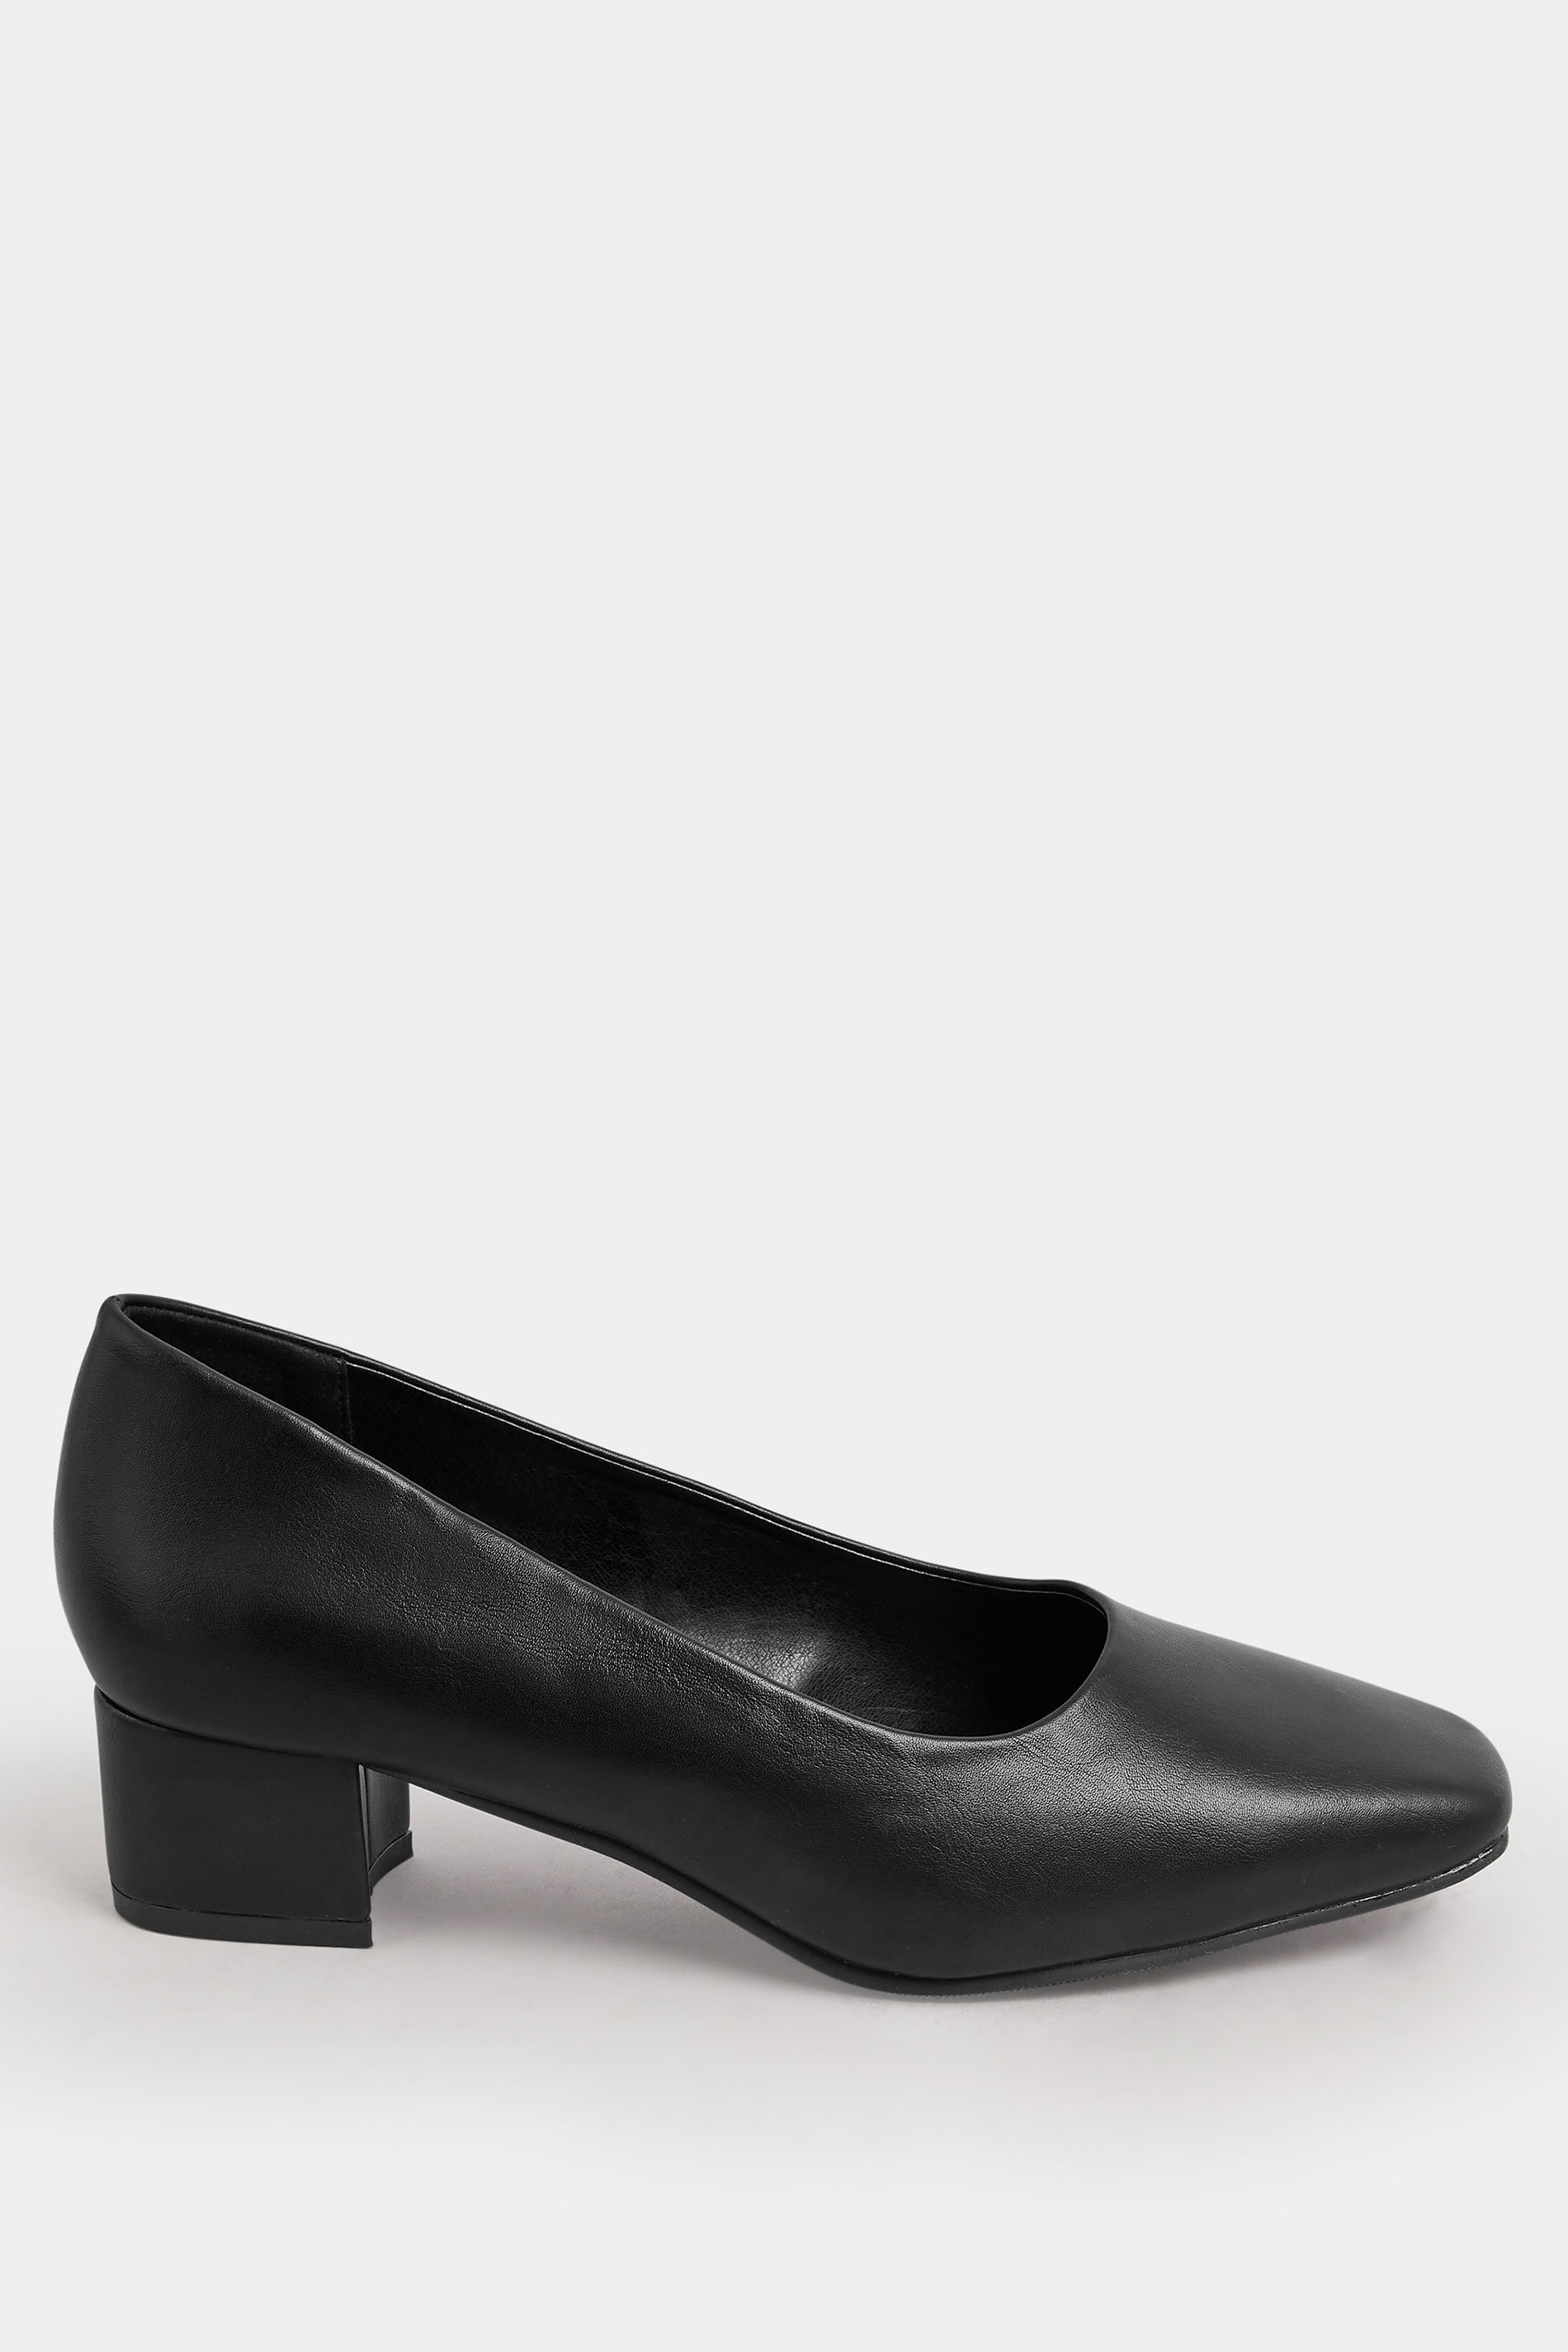 Black Faux Leather Block Heel Court Shoes In Extra Wide EEE Fit 3